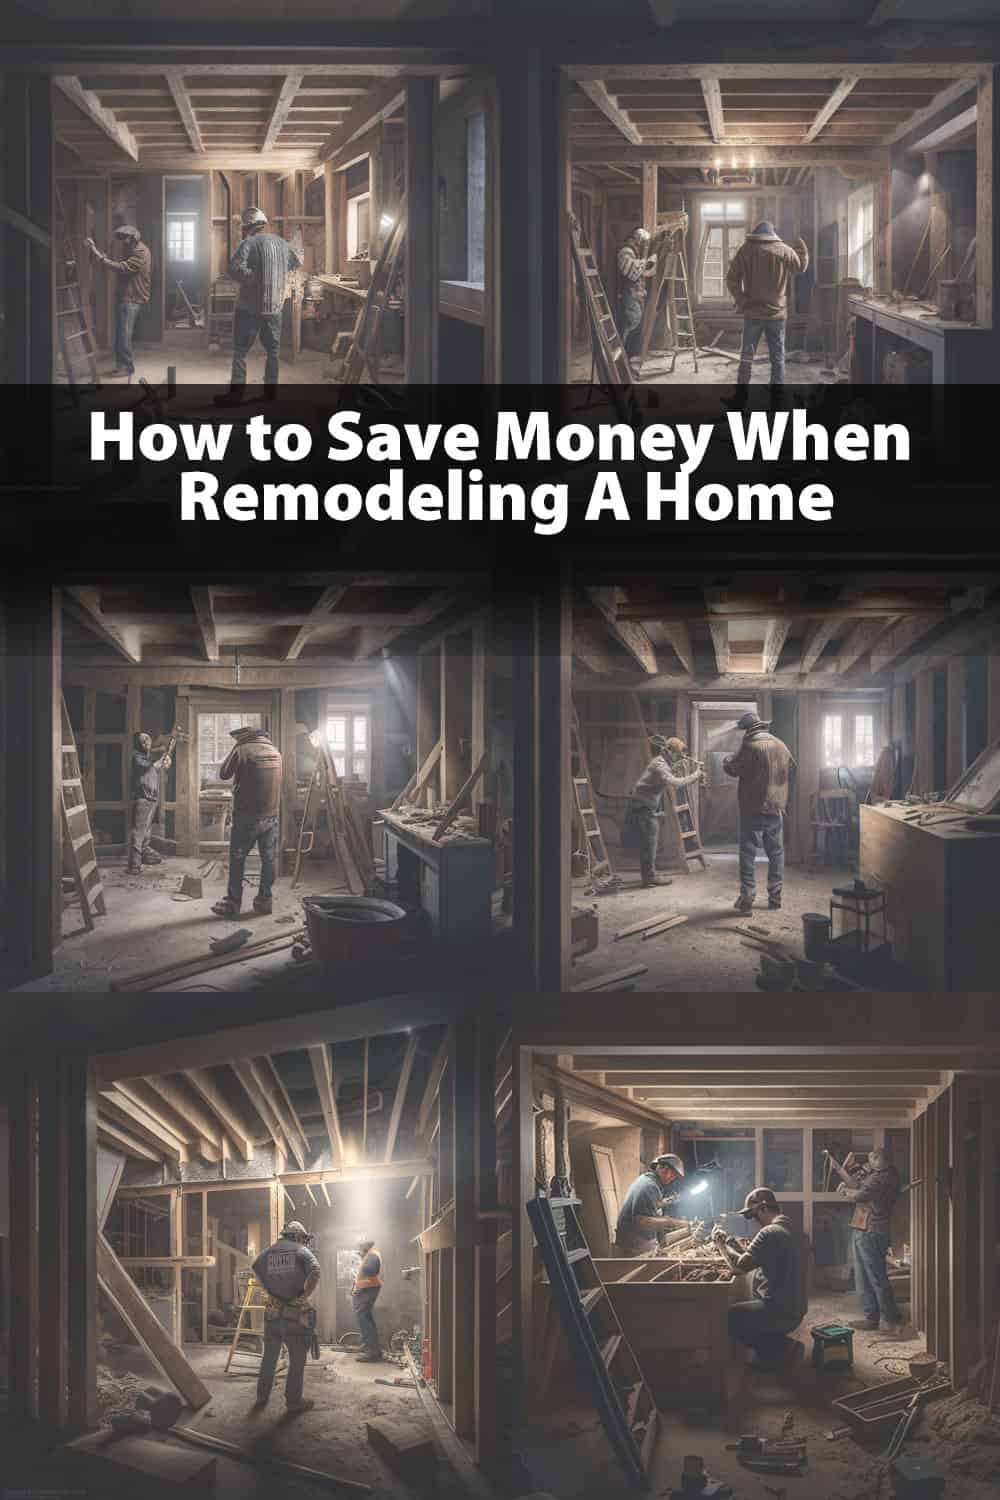 How to Save Money When Remodeling A Home